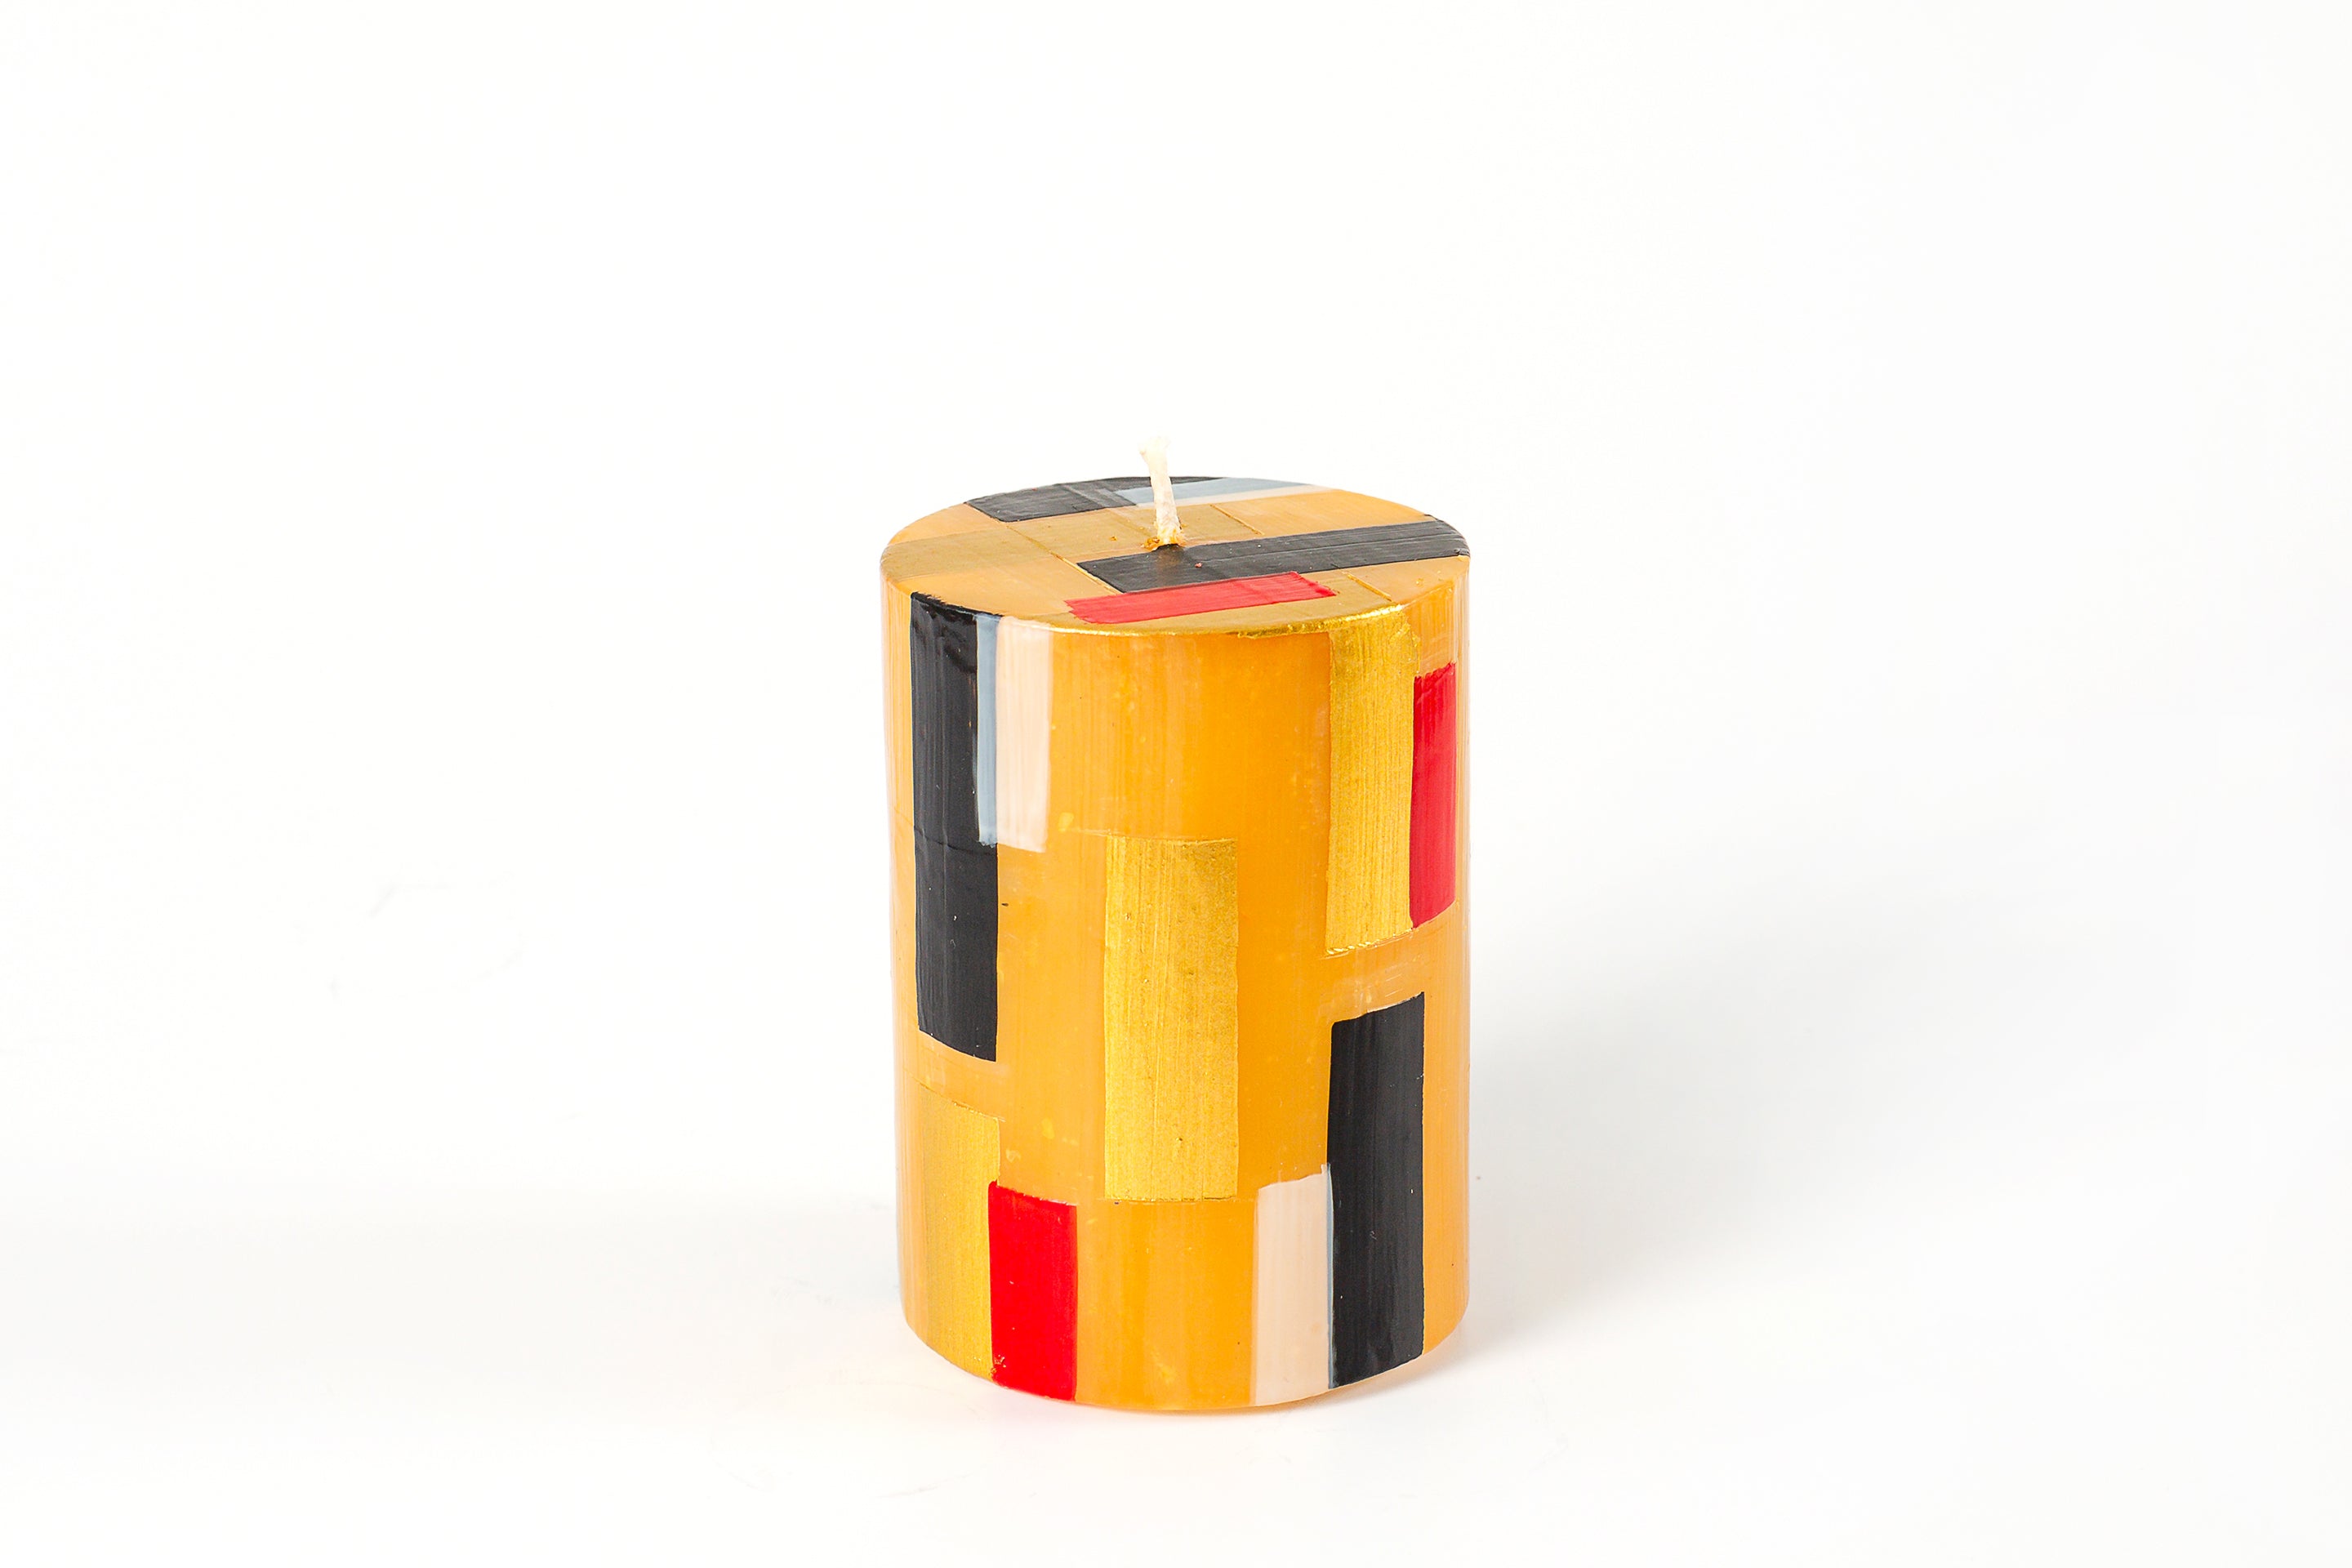 Klimt 3" x 4" Pillar Candle. Creamy gold base color candles with touches of black, gold along with hints of red.